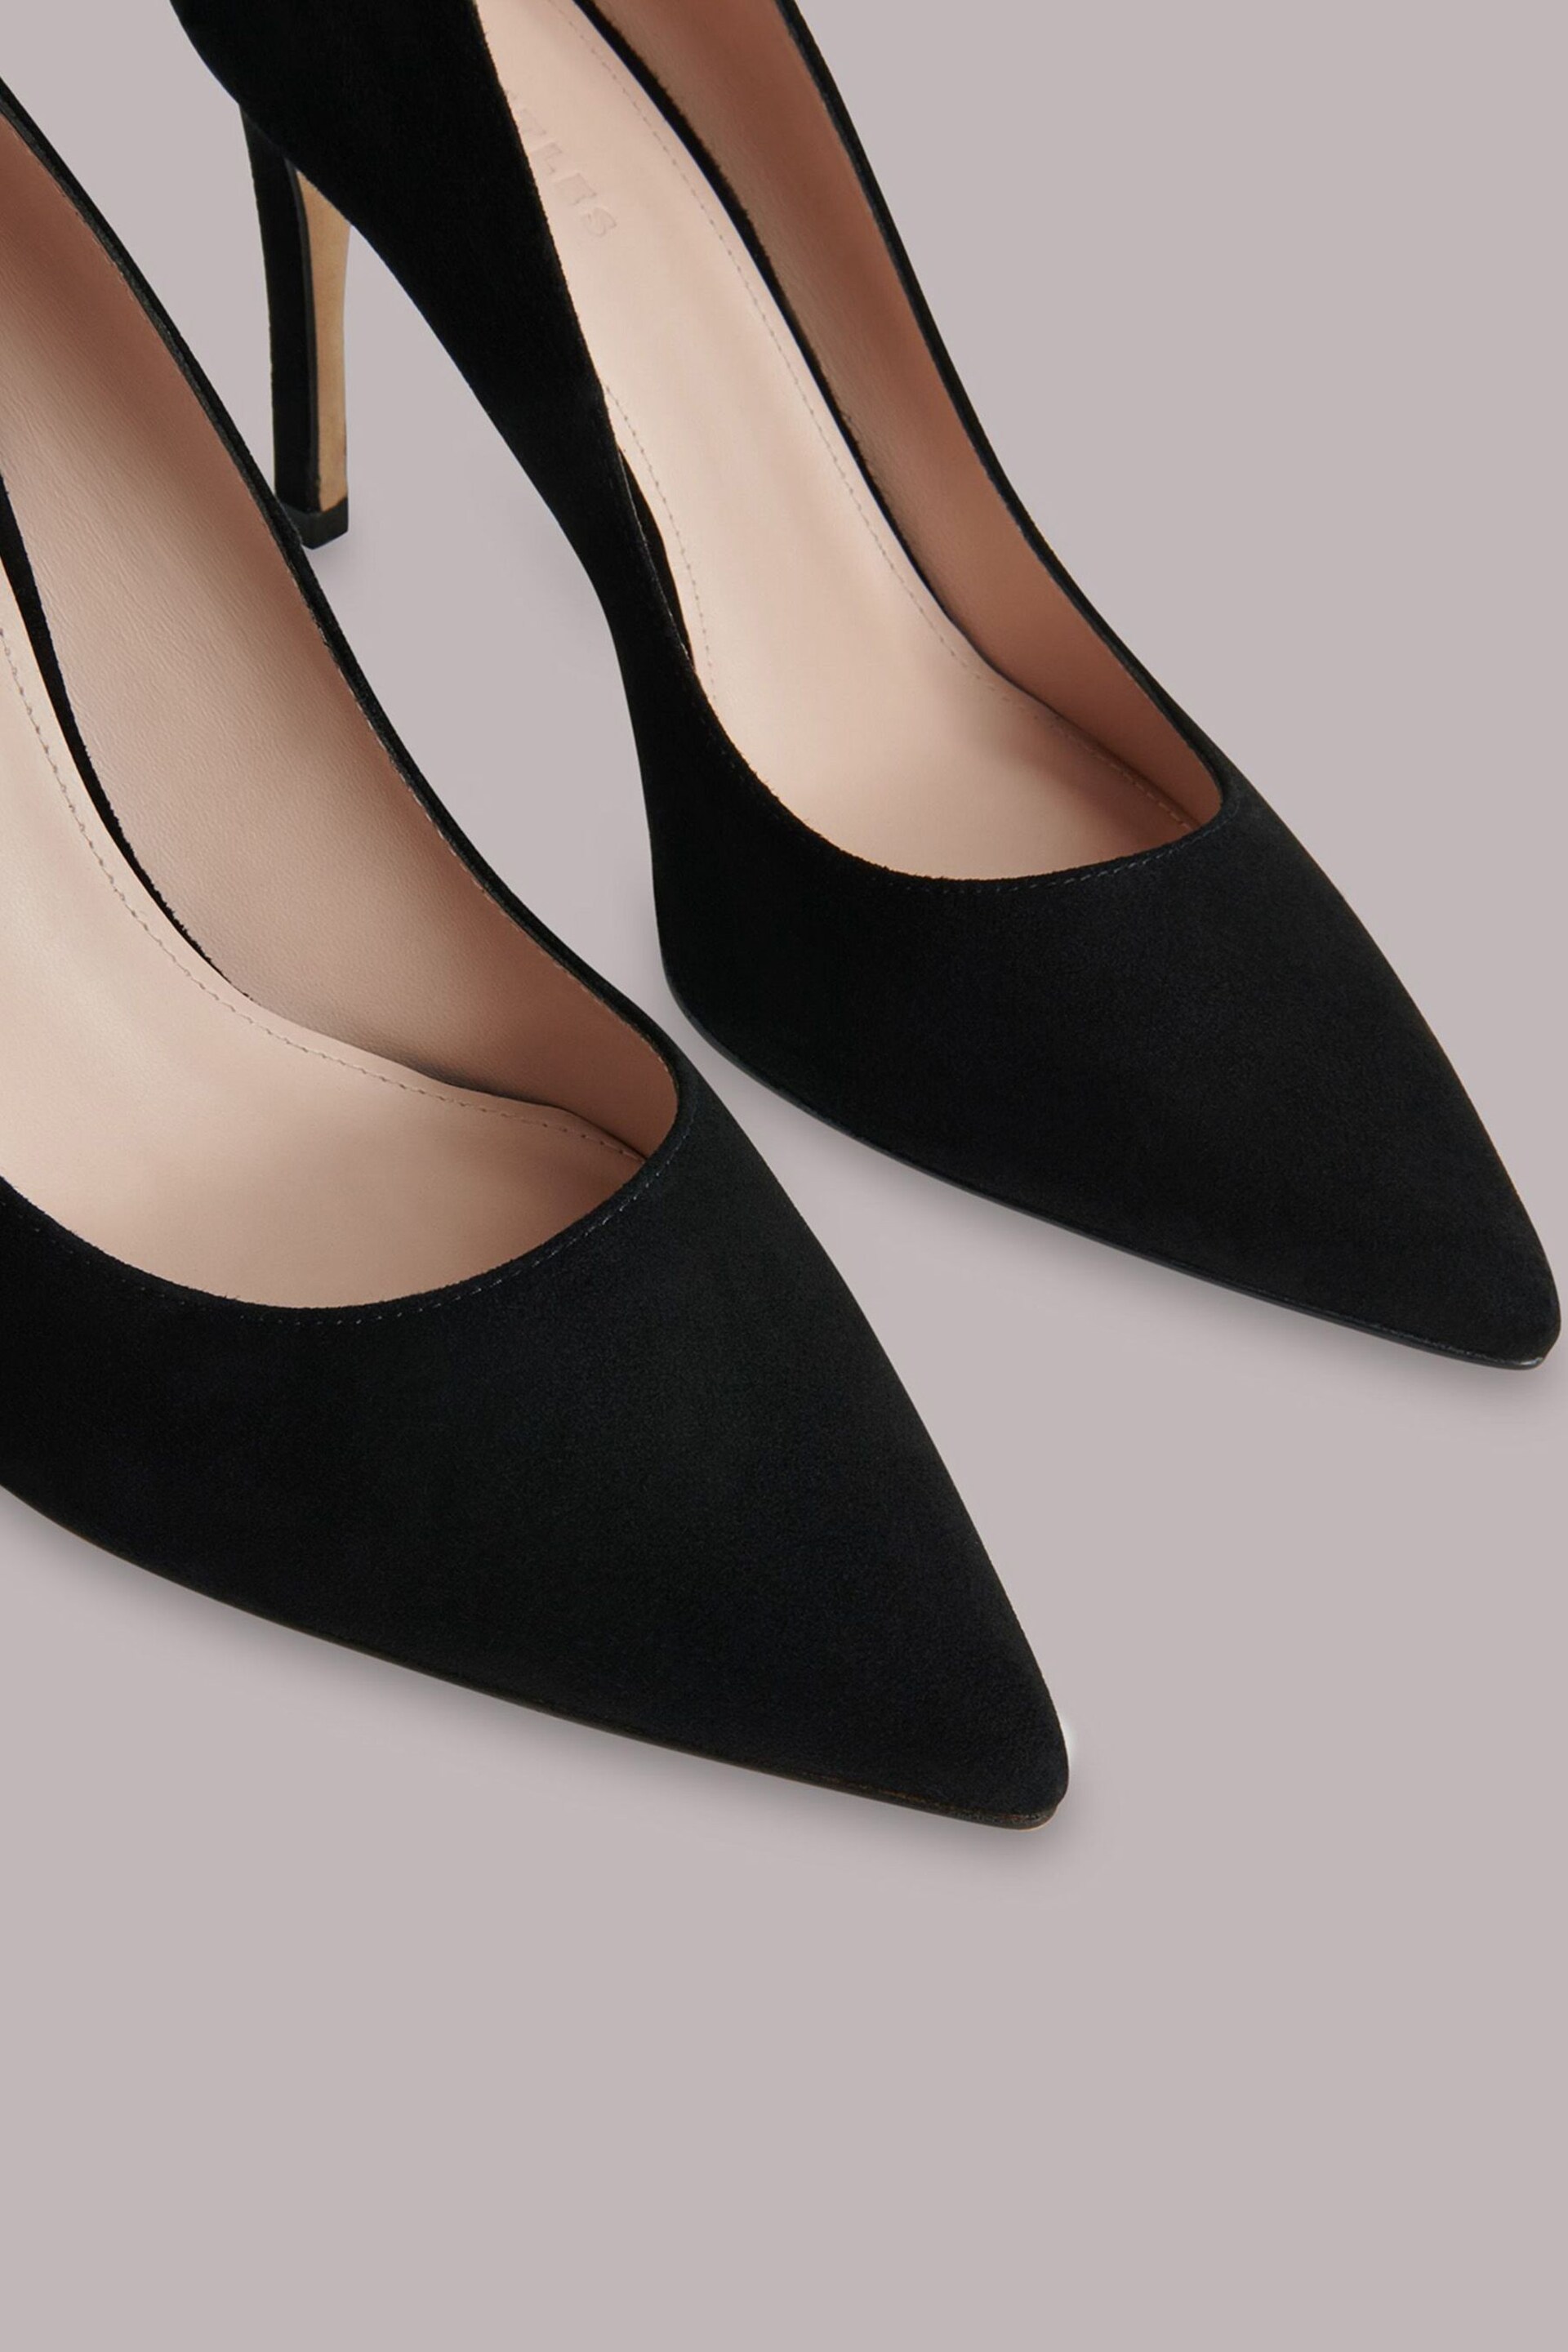 Whistles Corie Suede Black Heeled Pumps - Image 4 of 4